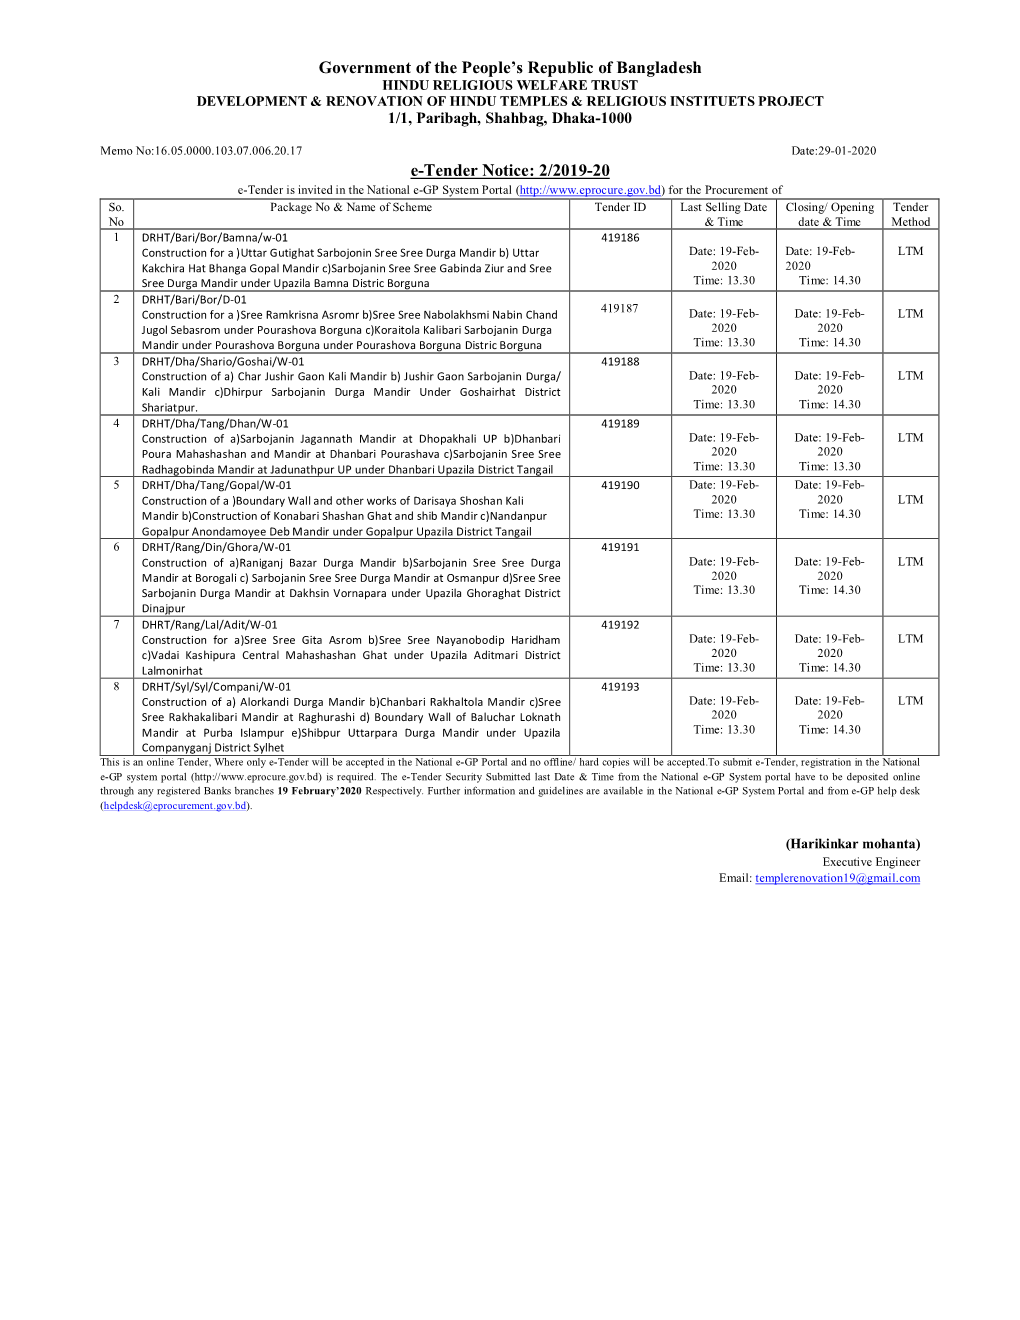 Government of the People's Republic of Bangladesh E-Tender Notice: 2